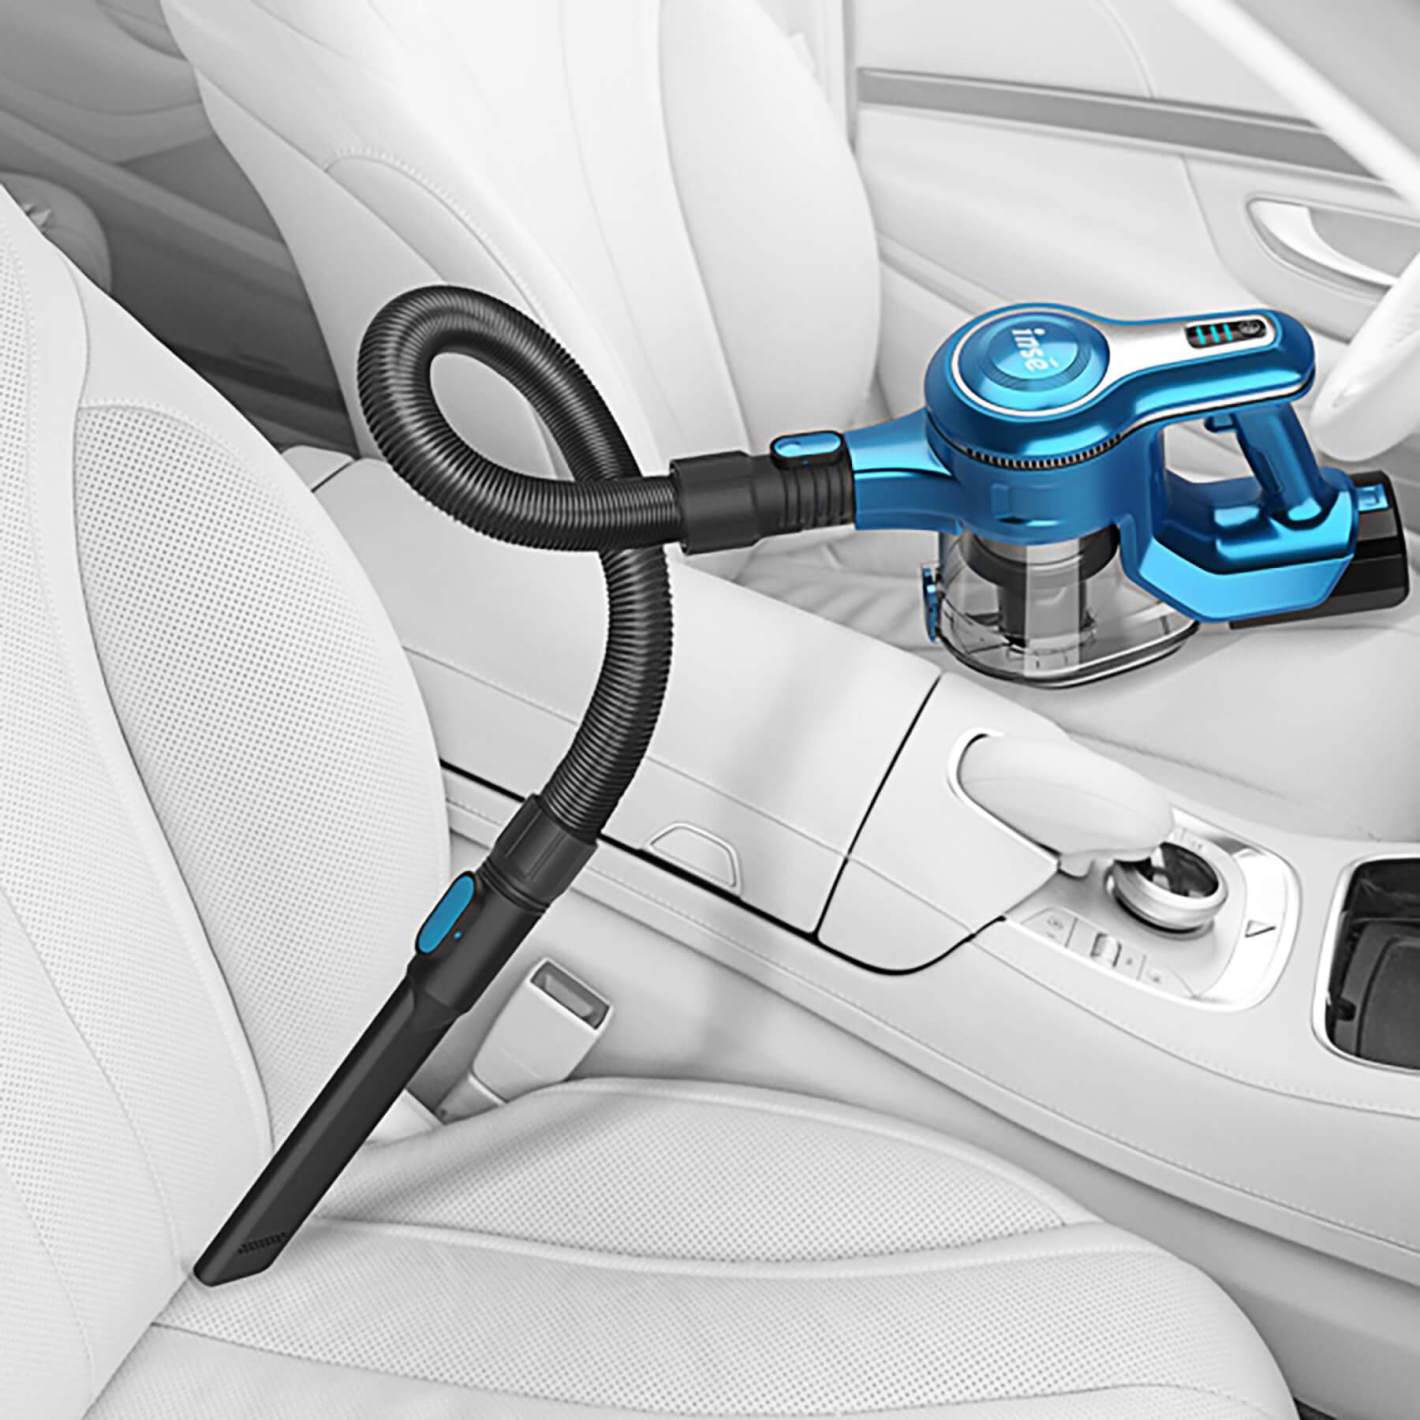 INSE S6P Pro Cordless Vacuum Cleaner with 2 Batteries, Up to 80min Run ...